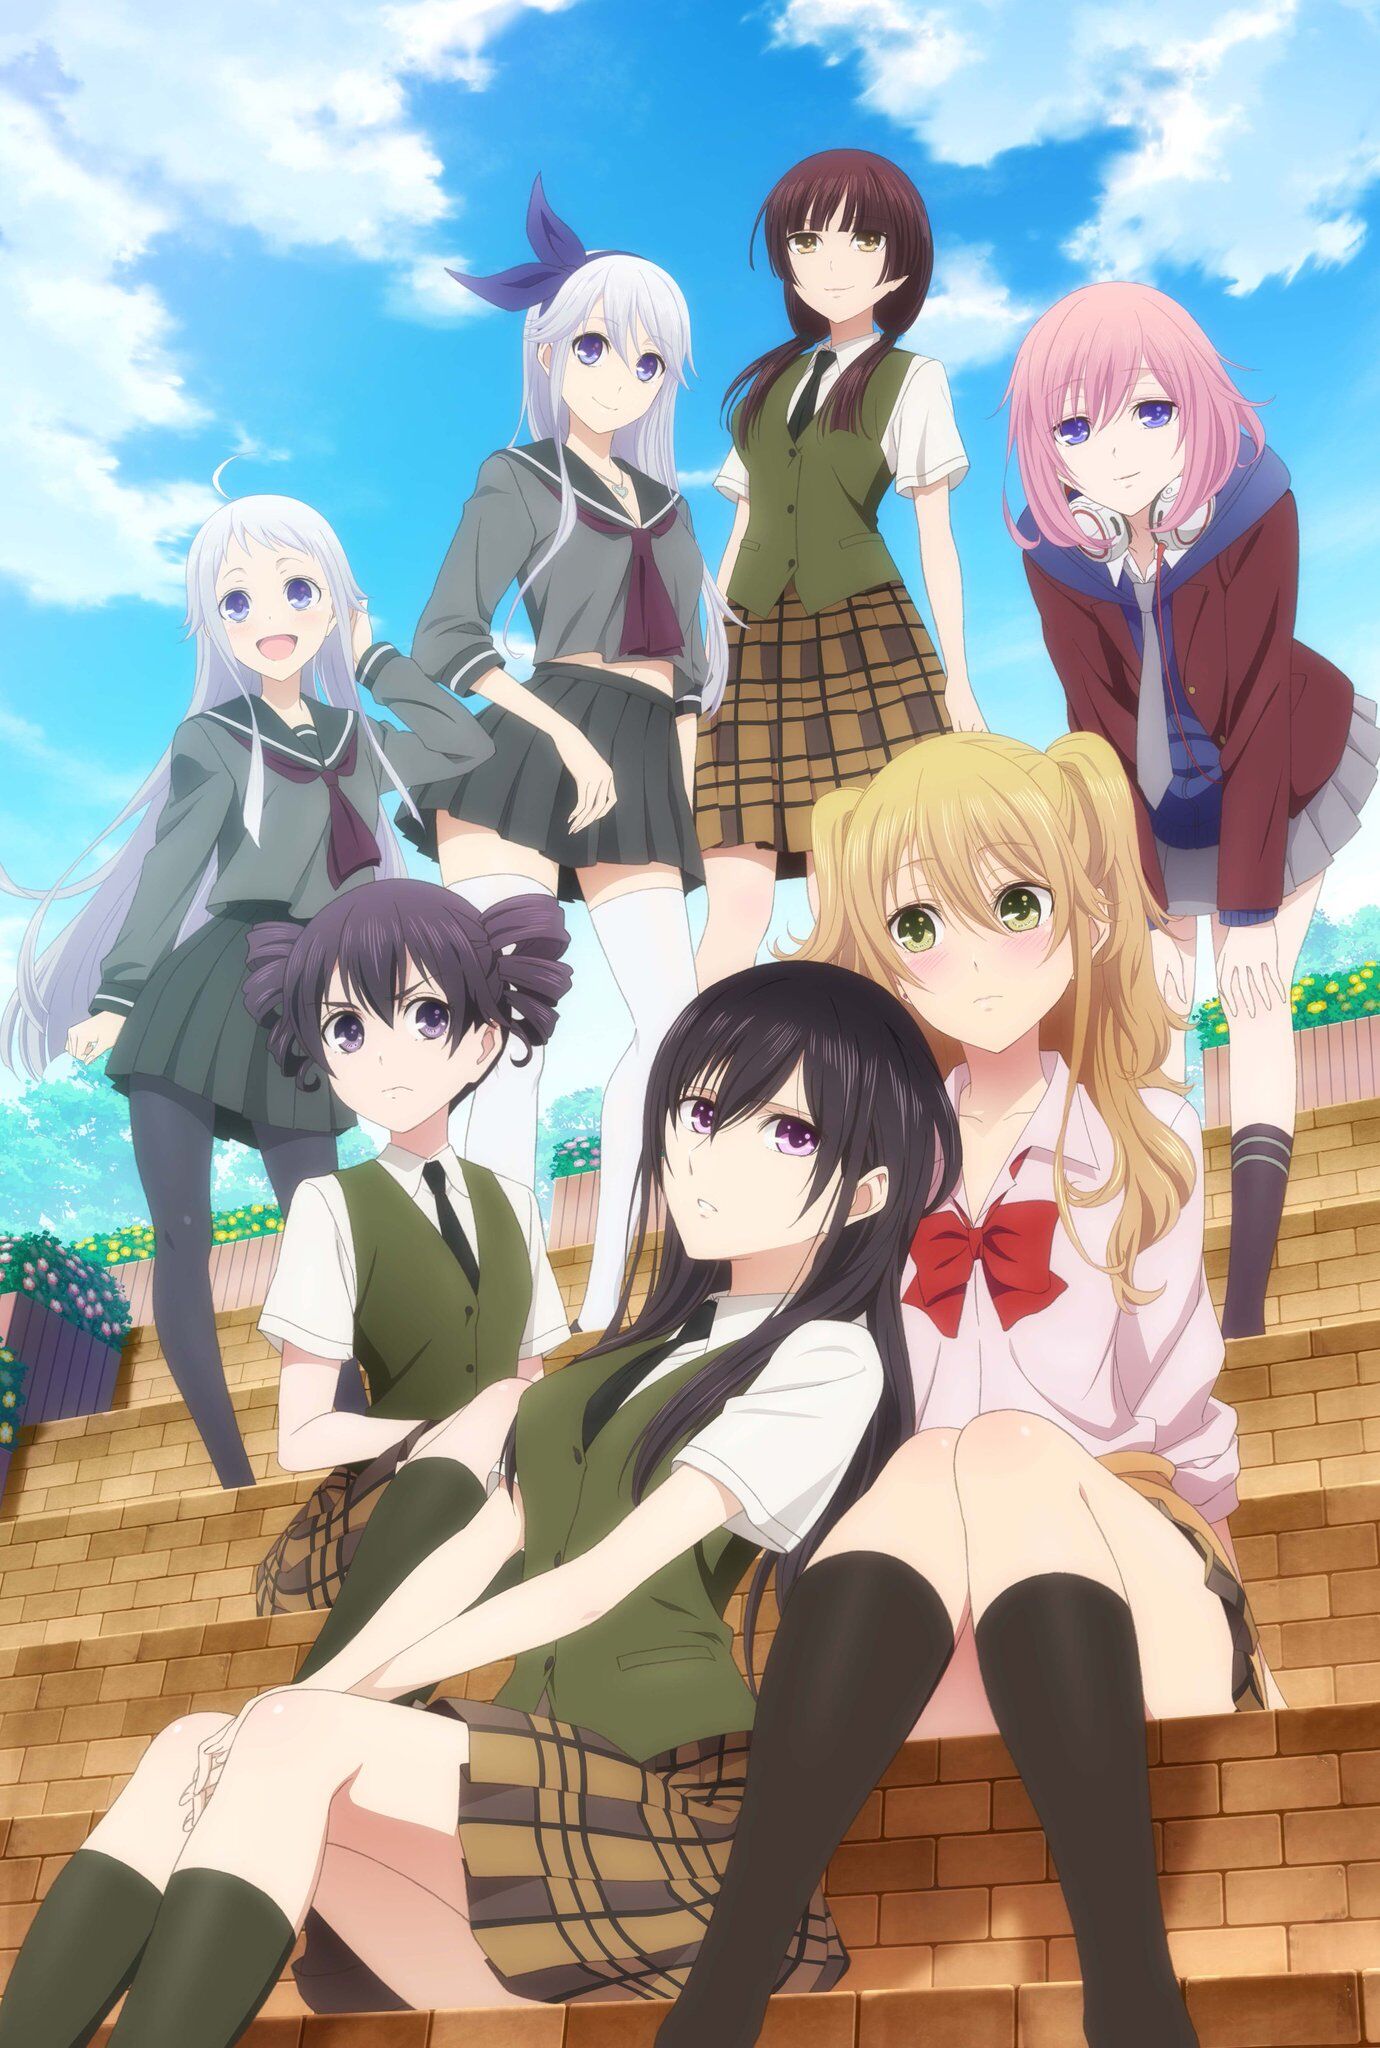 Spy Classroom Season 2 announces release date with trailer and key visual  Mark your calendars  PINKVILLA